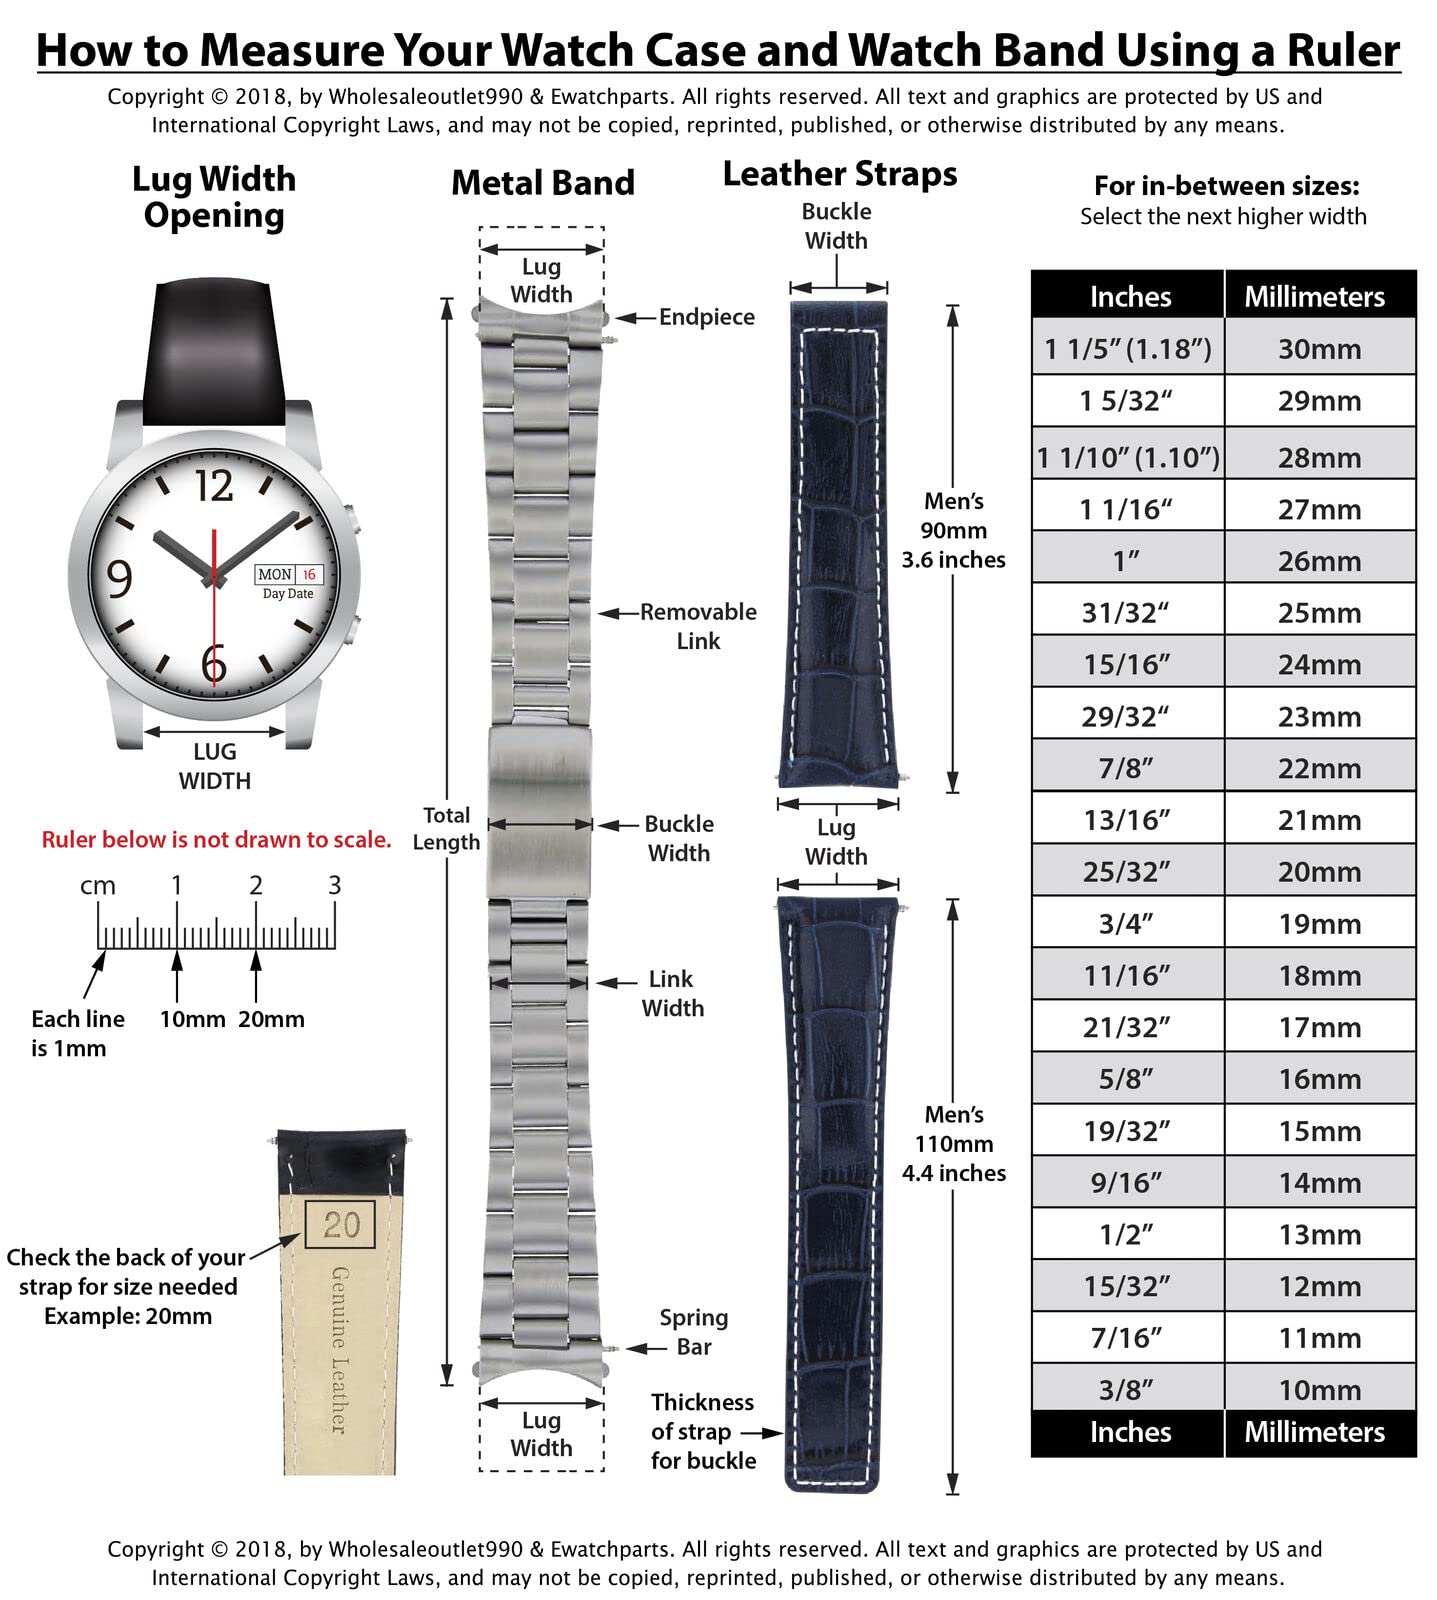 Ewatchparts 22MM WATCH BAND BRACELET COMPATIBLE WITH BREITLING NAVITIMER A13322 7 LINK STAINLESS S SHINY